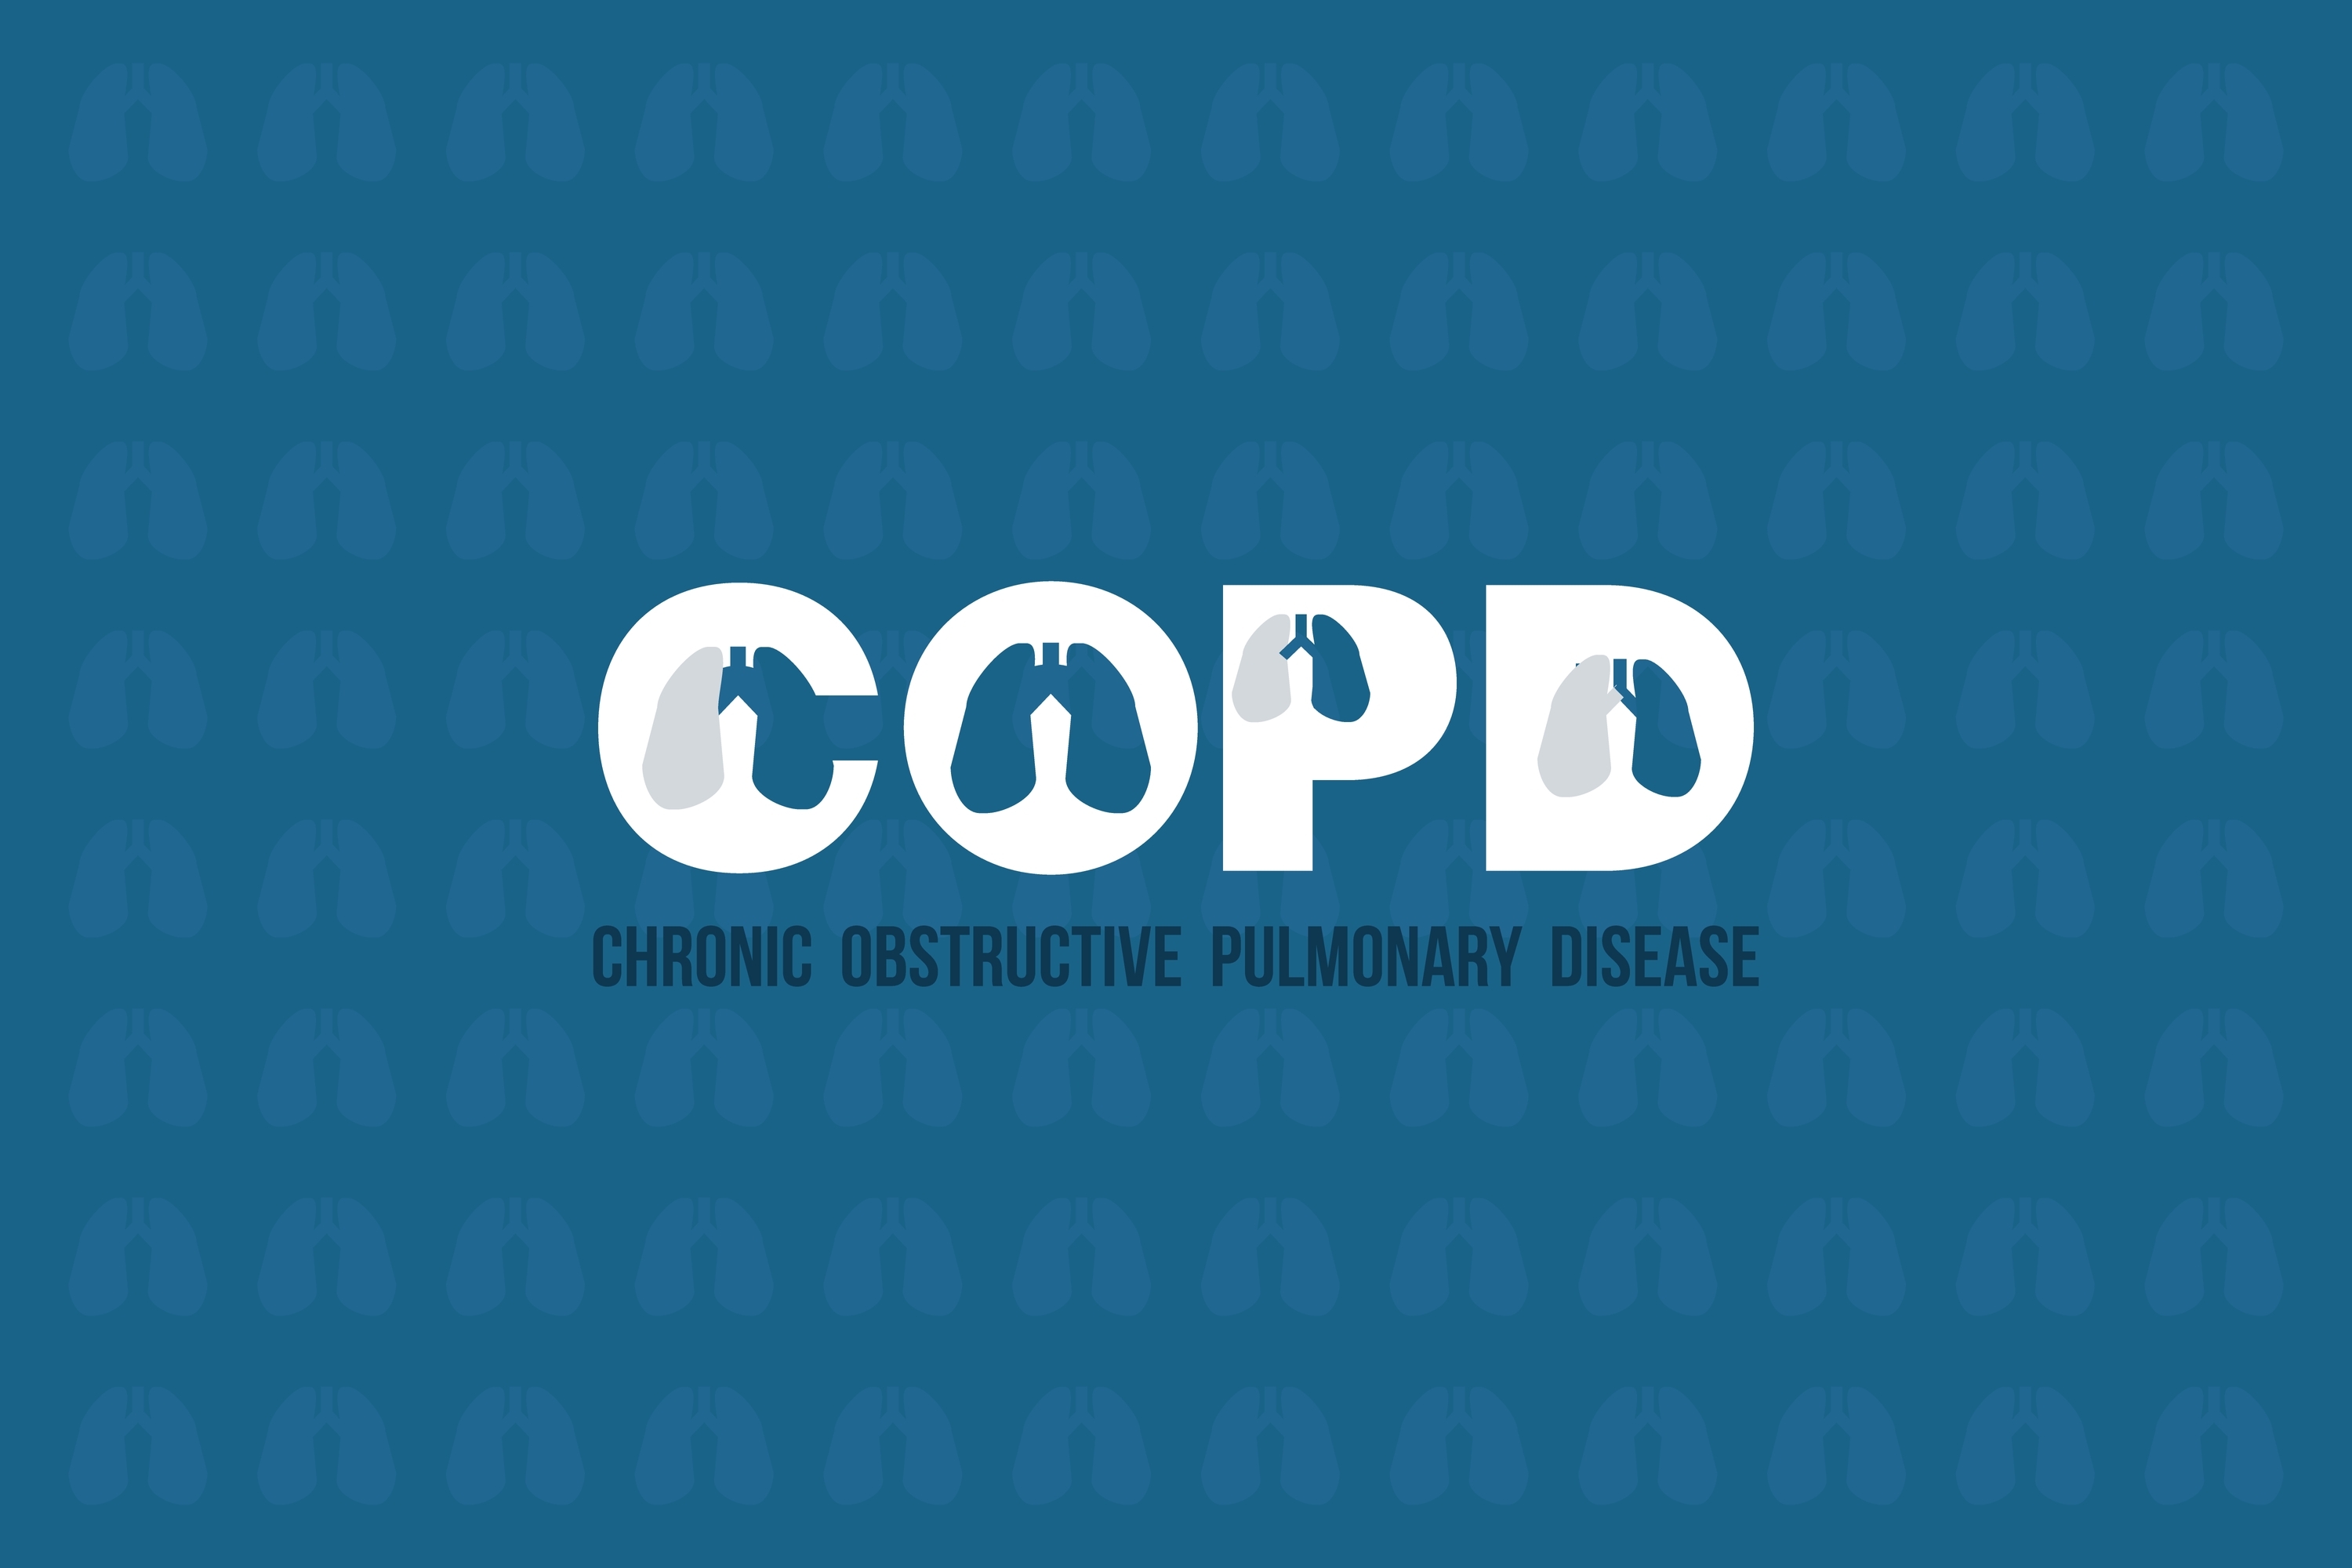 A traveler's guide for COPD patients